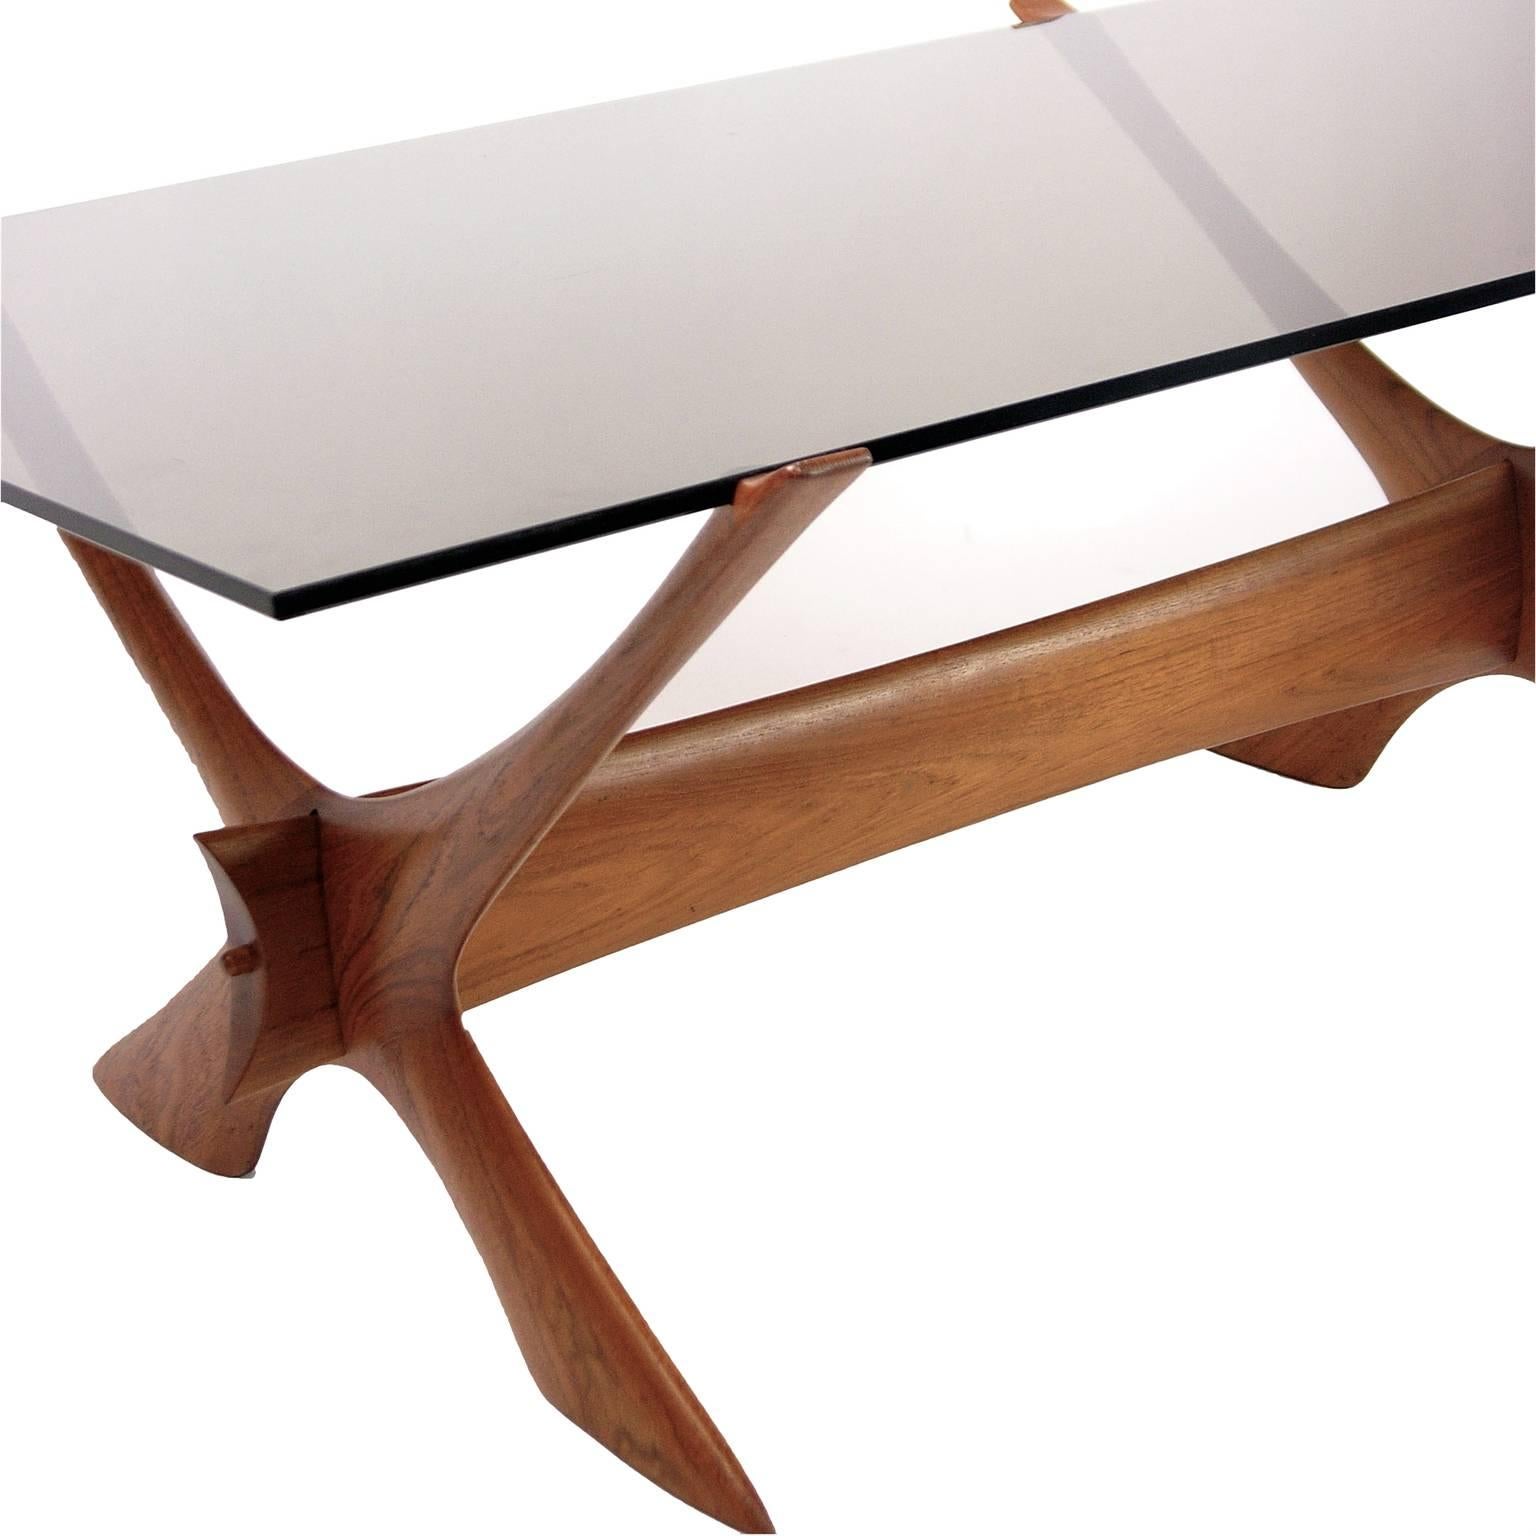 Modern Teak and Smokey Glass x Base Coffee Table by Fredrik Schriever Abeln In Good Condition For Sale In Hudson, NY